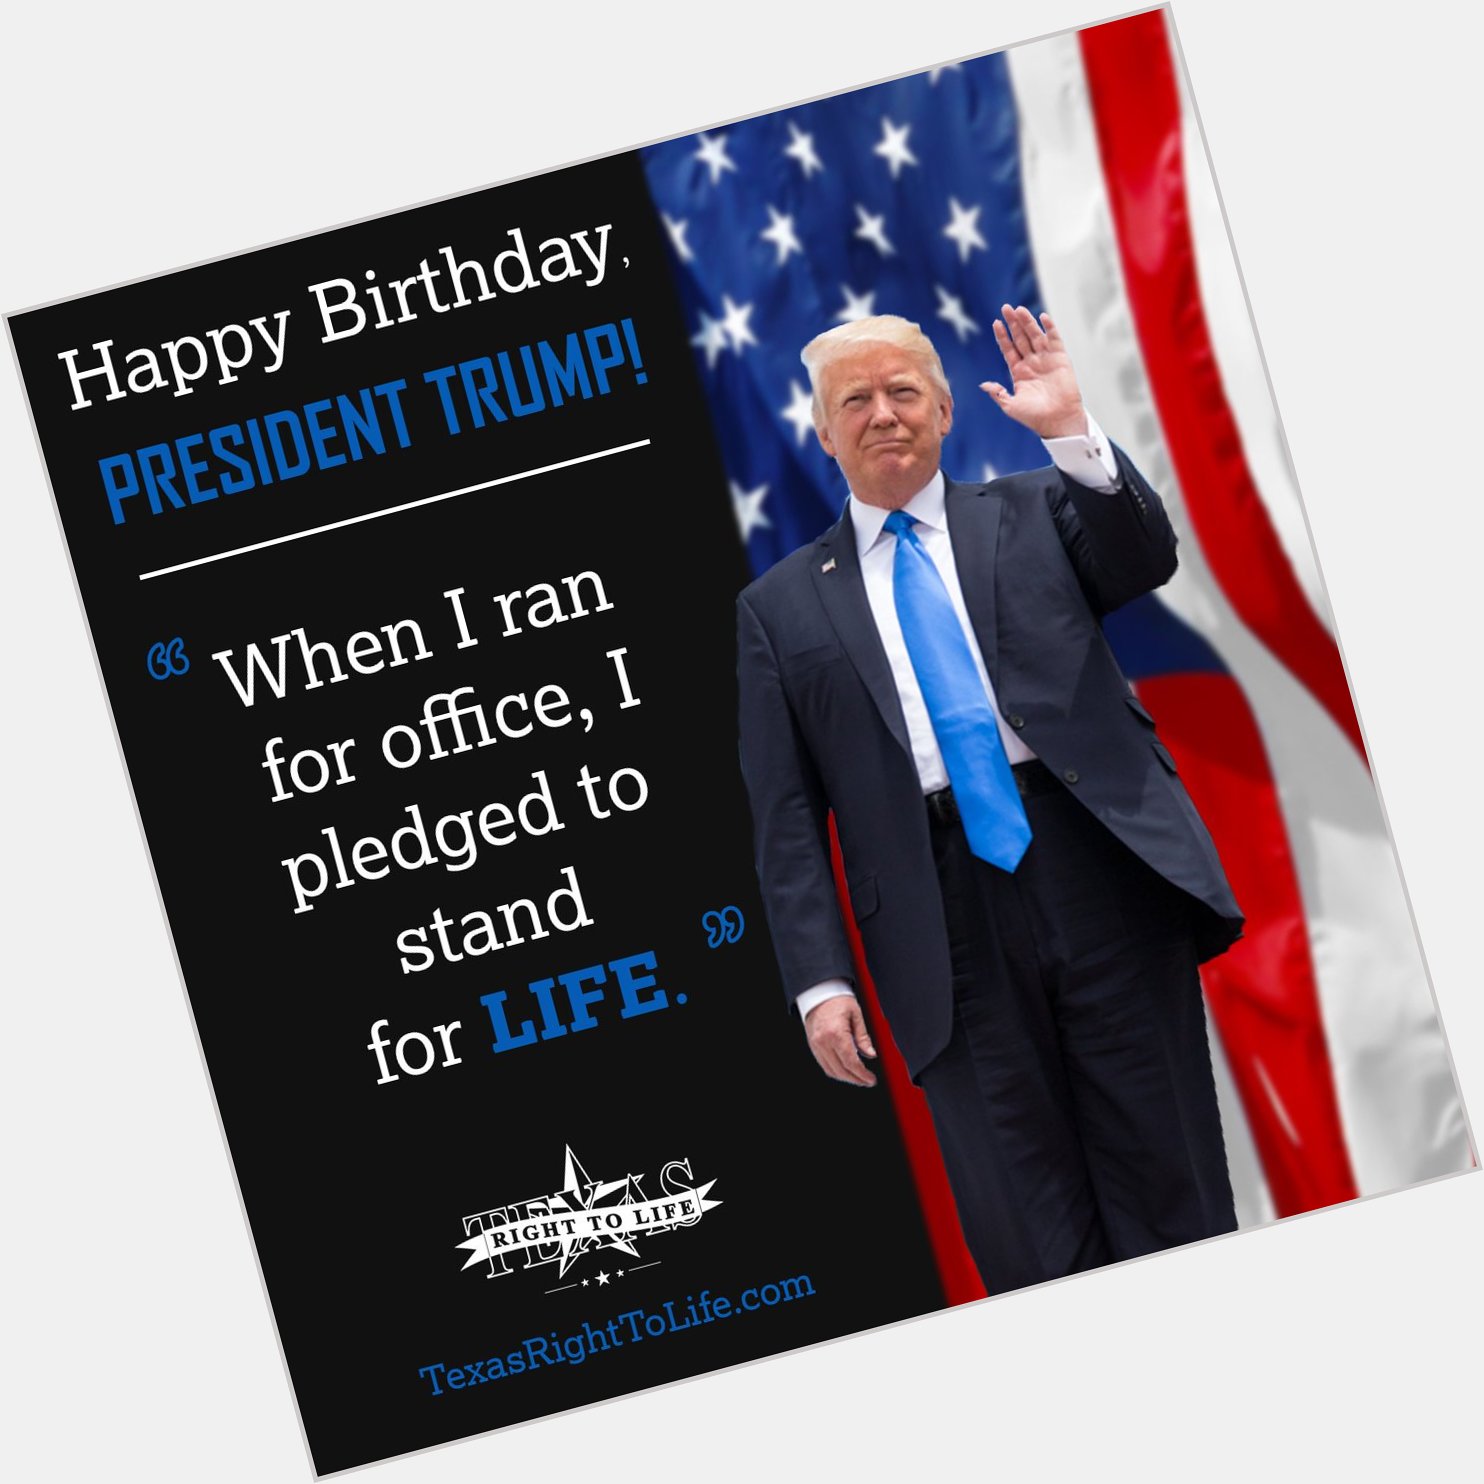 Join us in wishing a very happy birthday to President Donald Trump!   